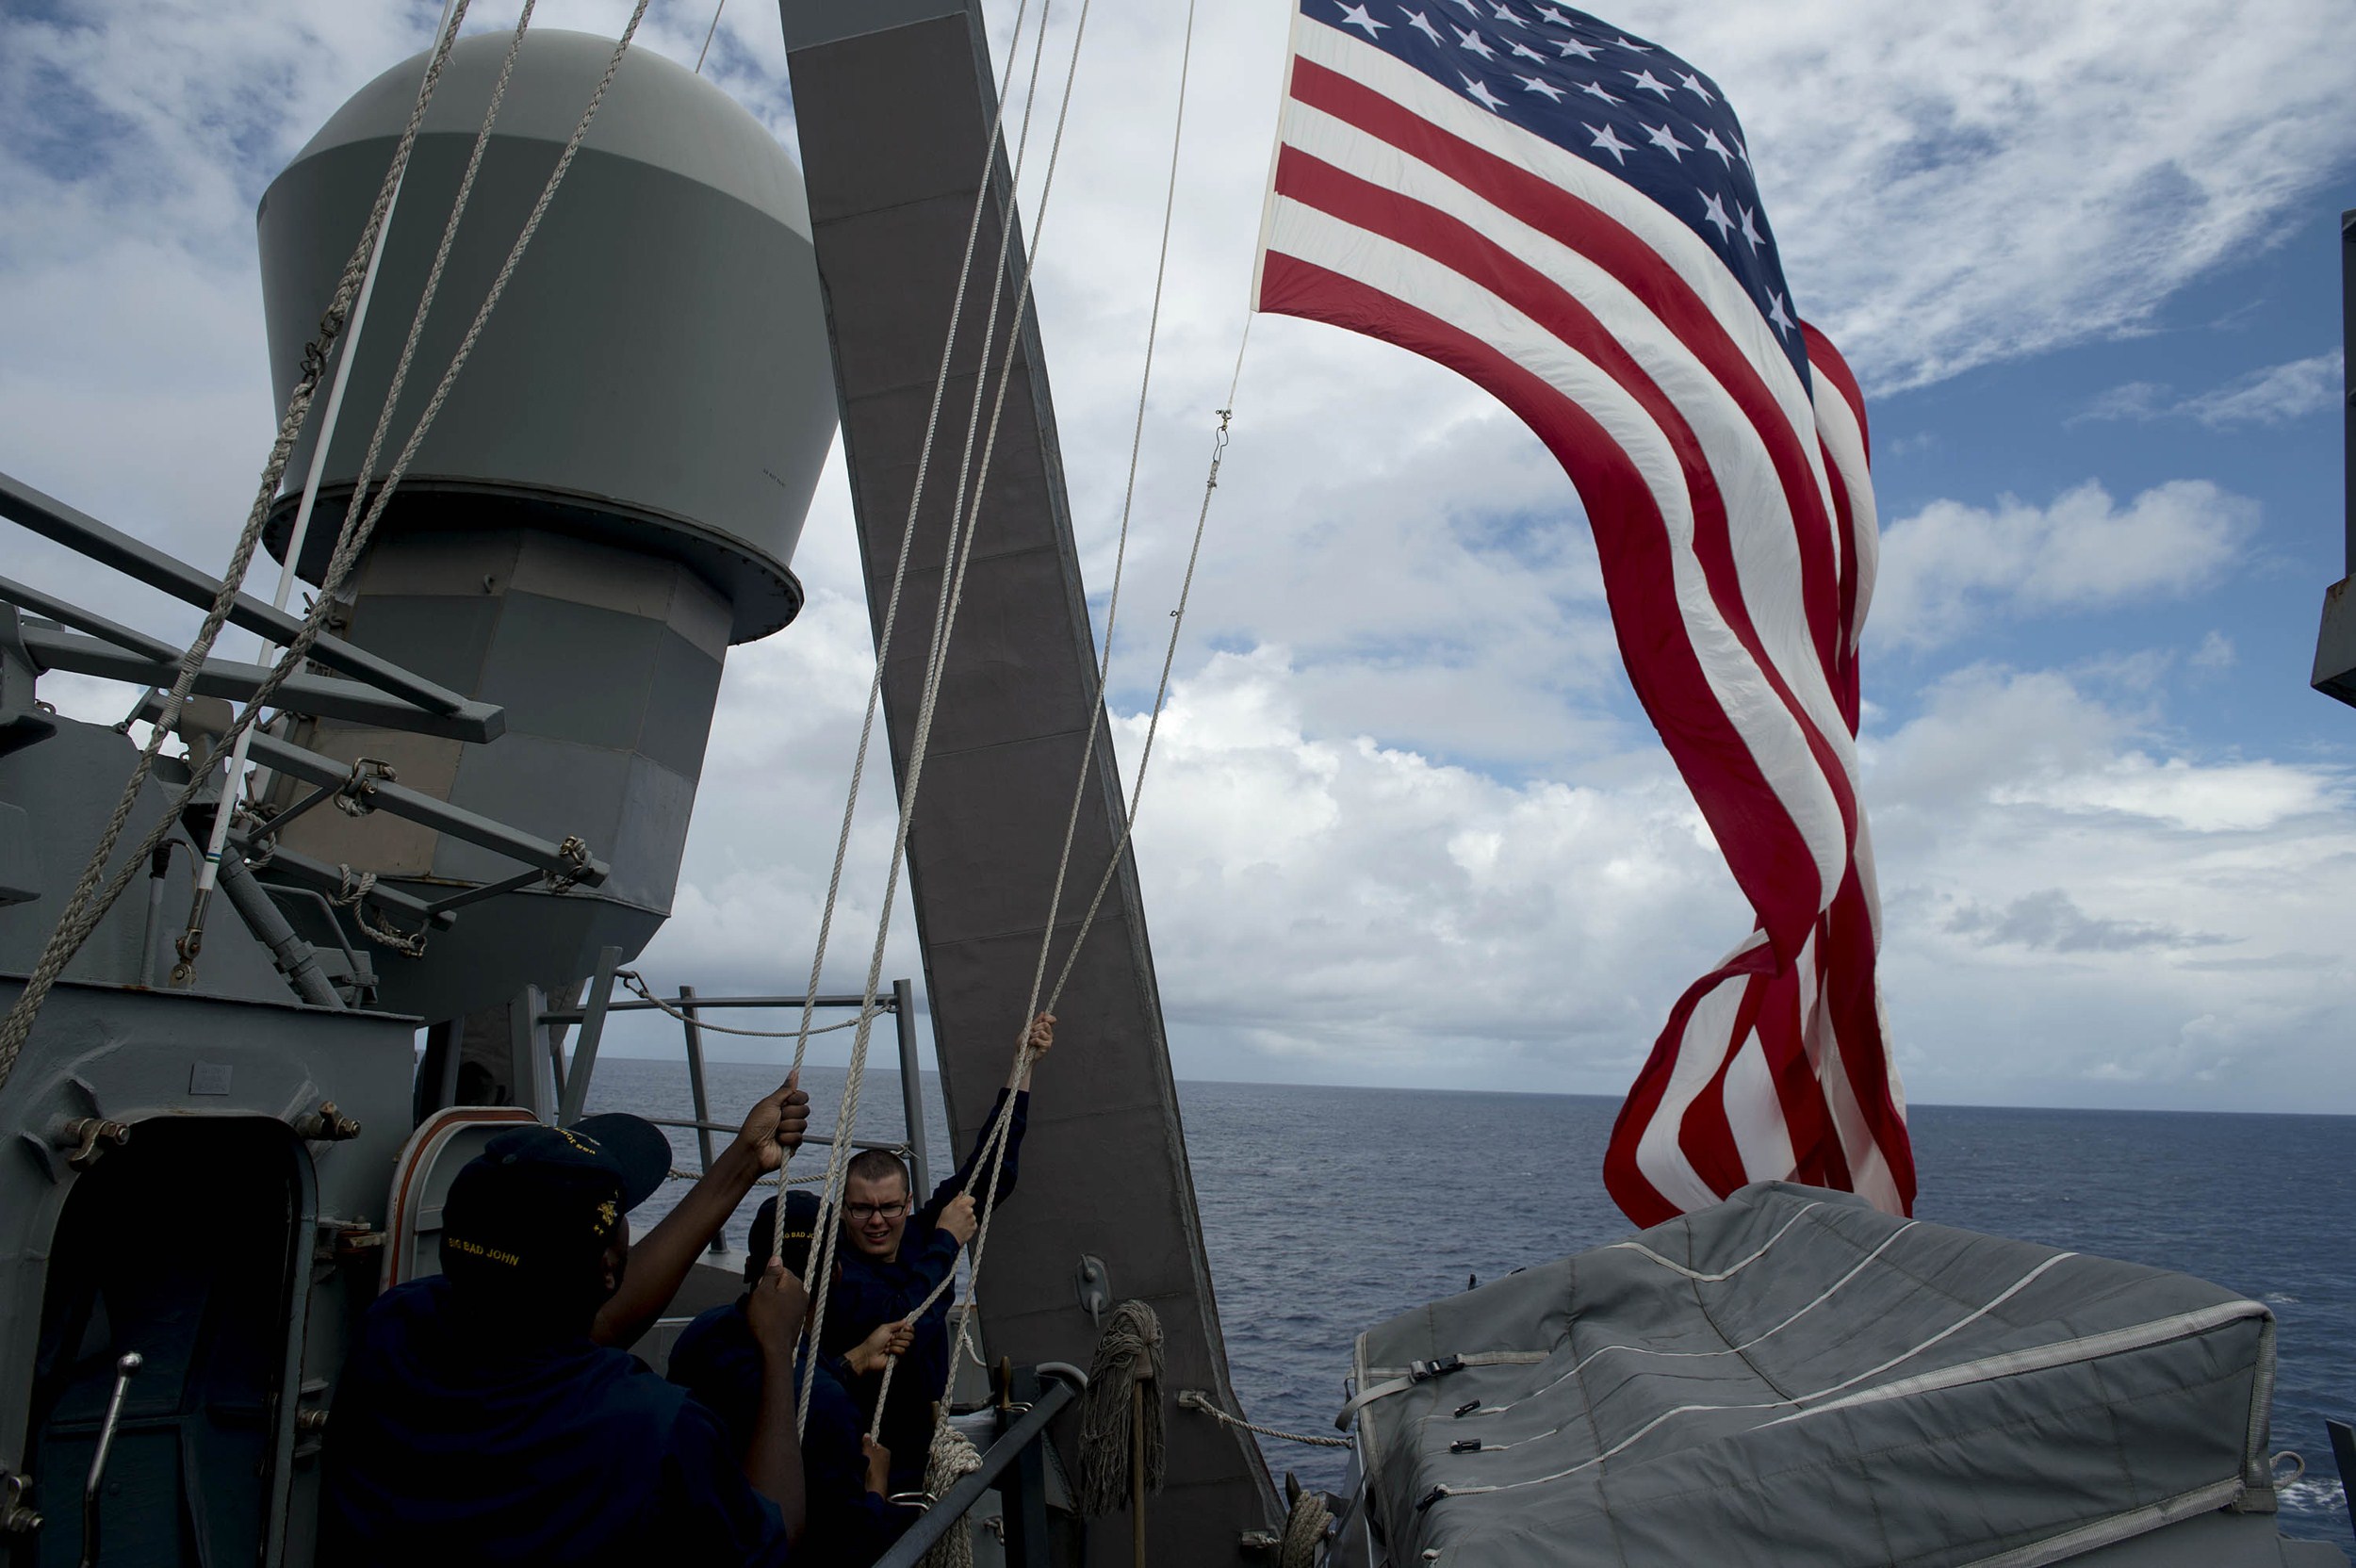 U.S. Navy personnel aboard the U.S.S. <i>John S. McCain</i> raise their country's flag during a bilateral maritime exercise with the Philippine navy in the South China Sea near waters claimed by Beijing on June 28, 2014 (Noel Celis—AFP/Getty Images)